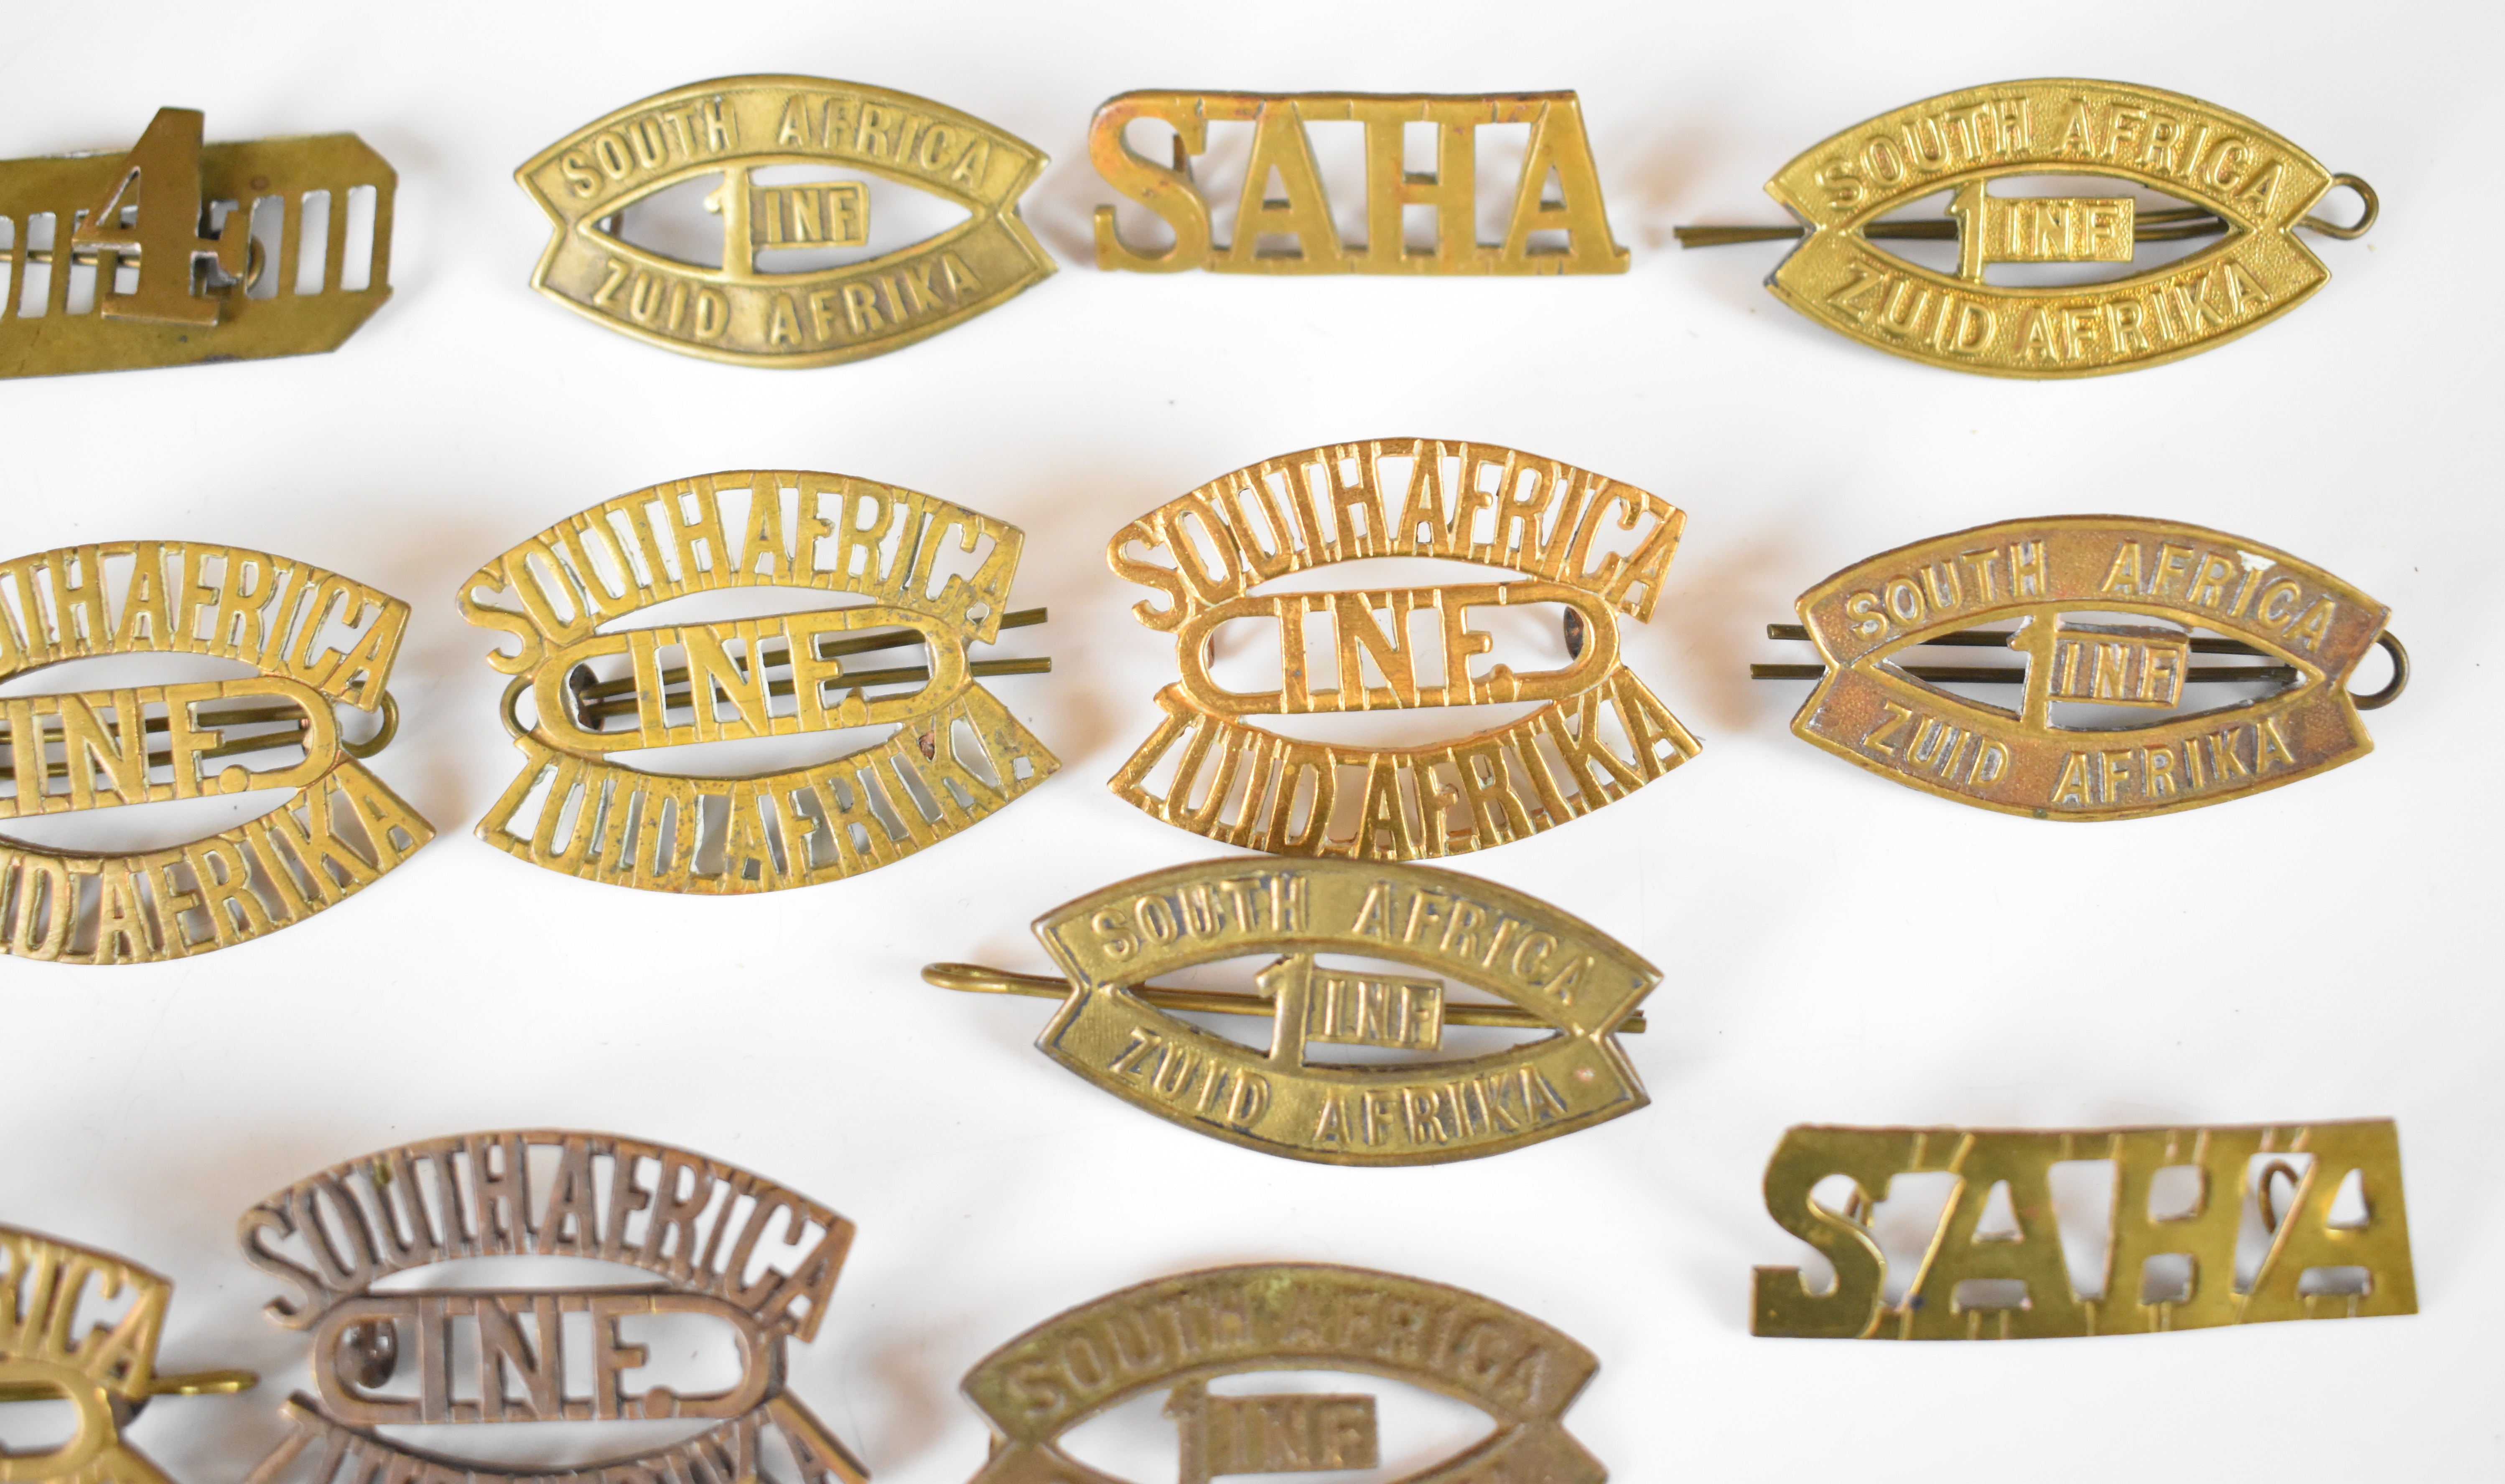 Approximately 20 South African shoulder titles / badges including 1st Infantry and SA HA examples - Image 3 of 5